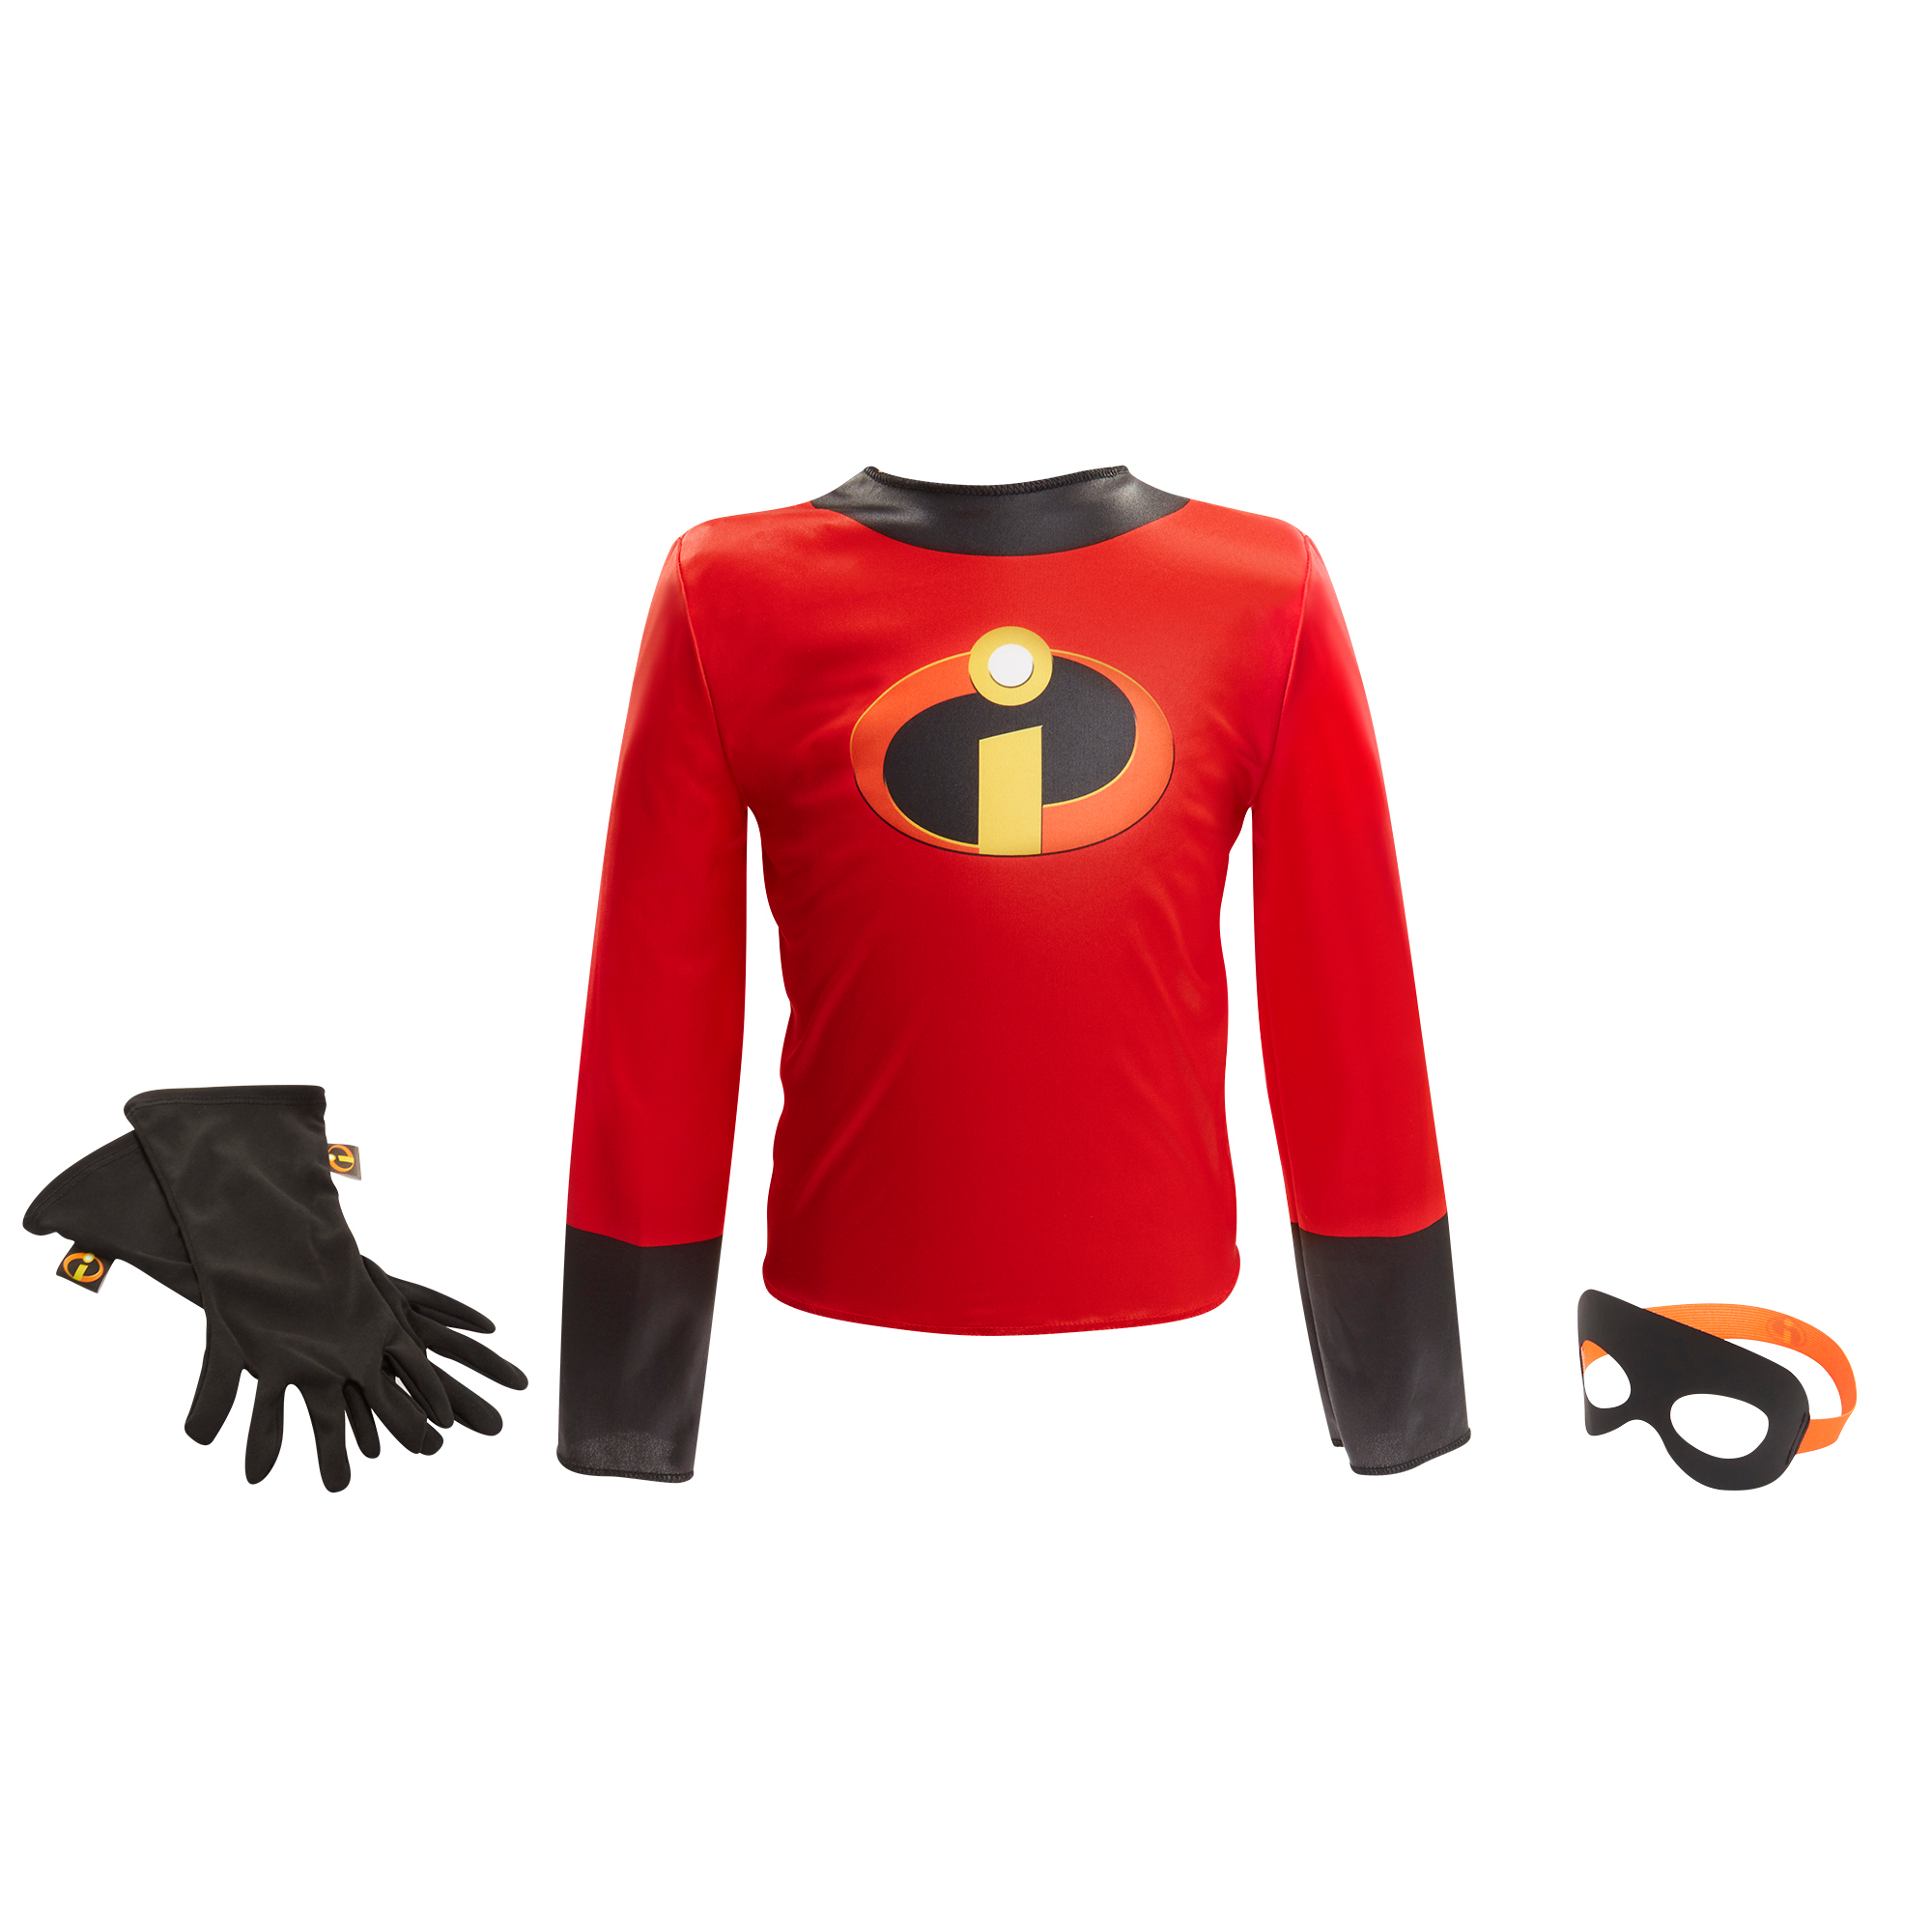 Incredibles 2 Dress Up Set Includes Mask, Shirt and Gloves